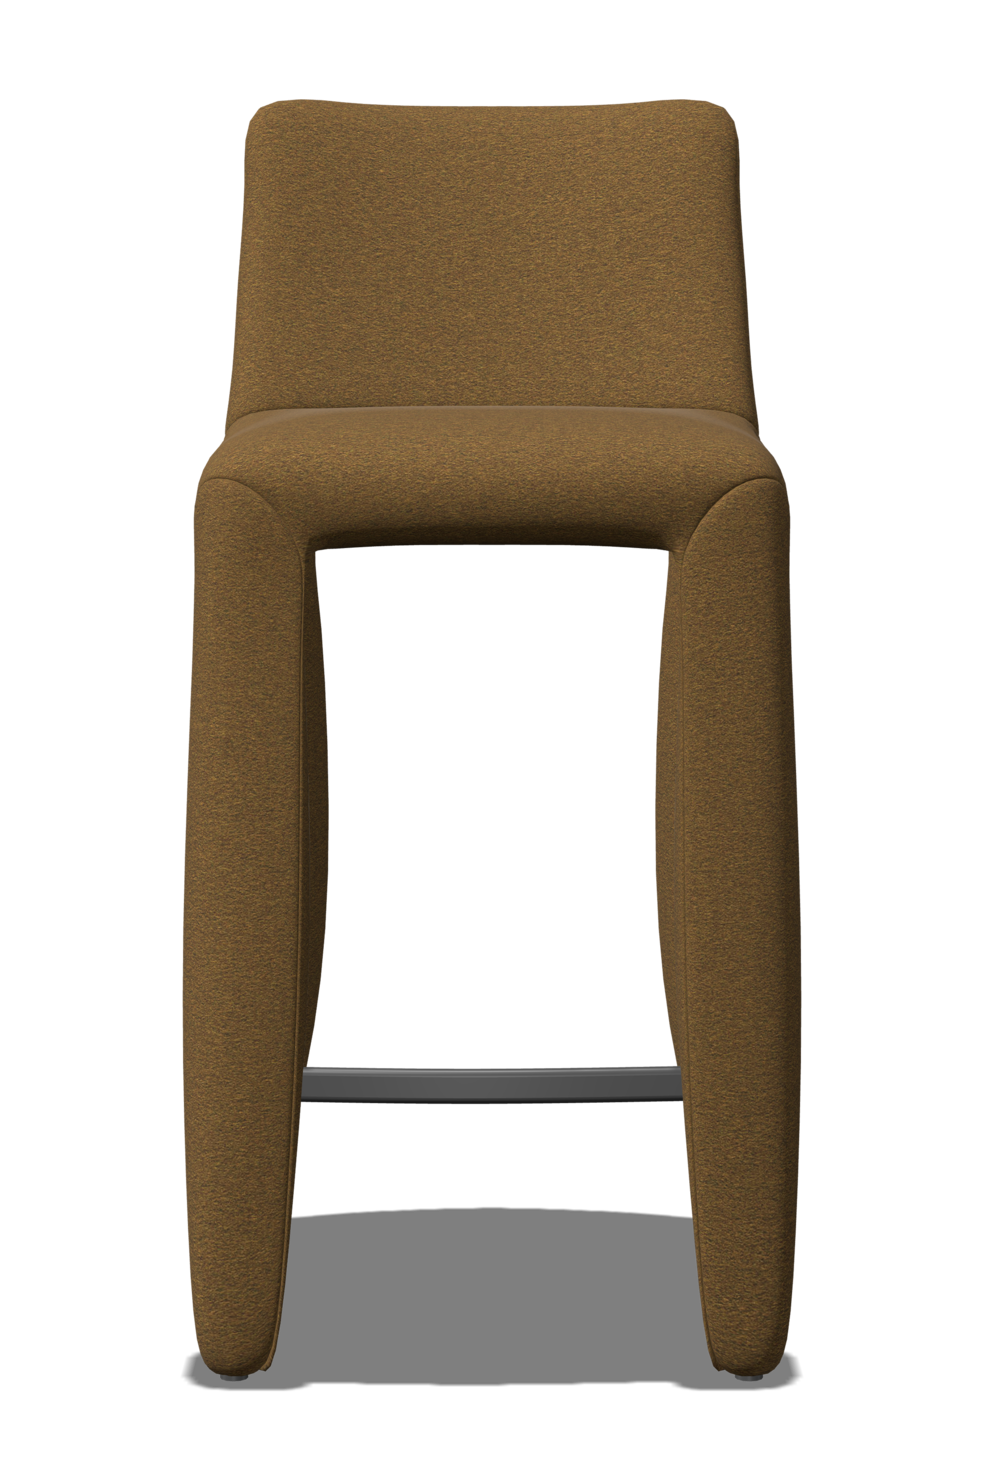 Monster Barstool low no stitching brown